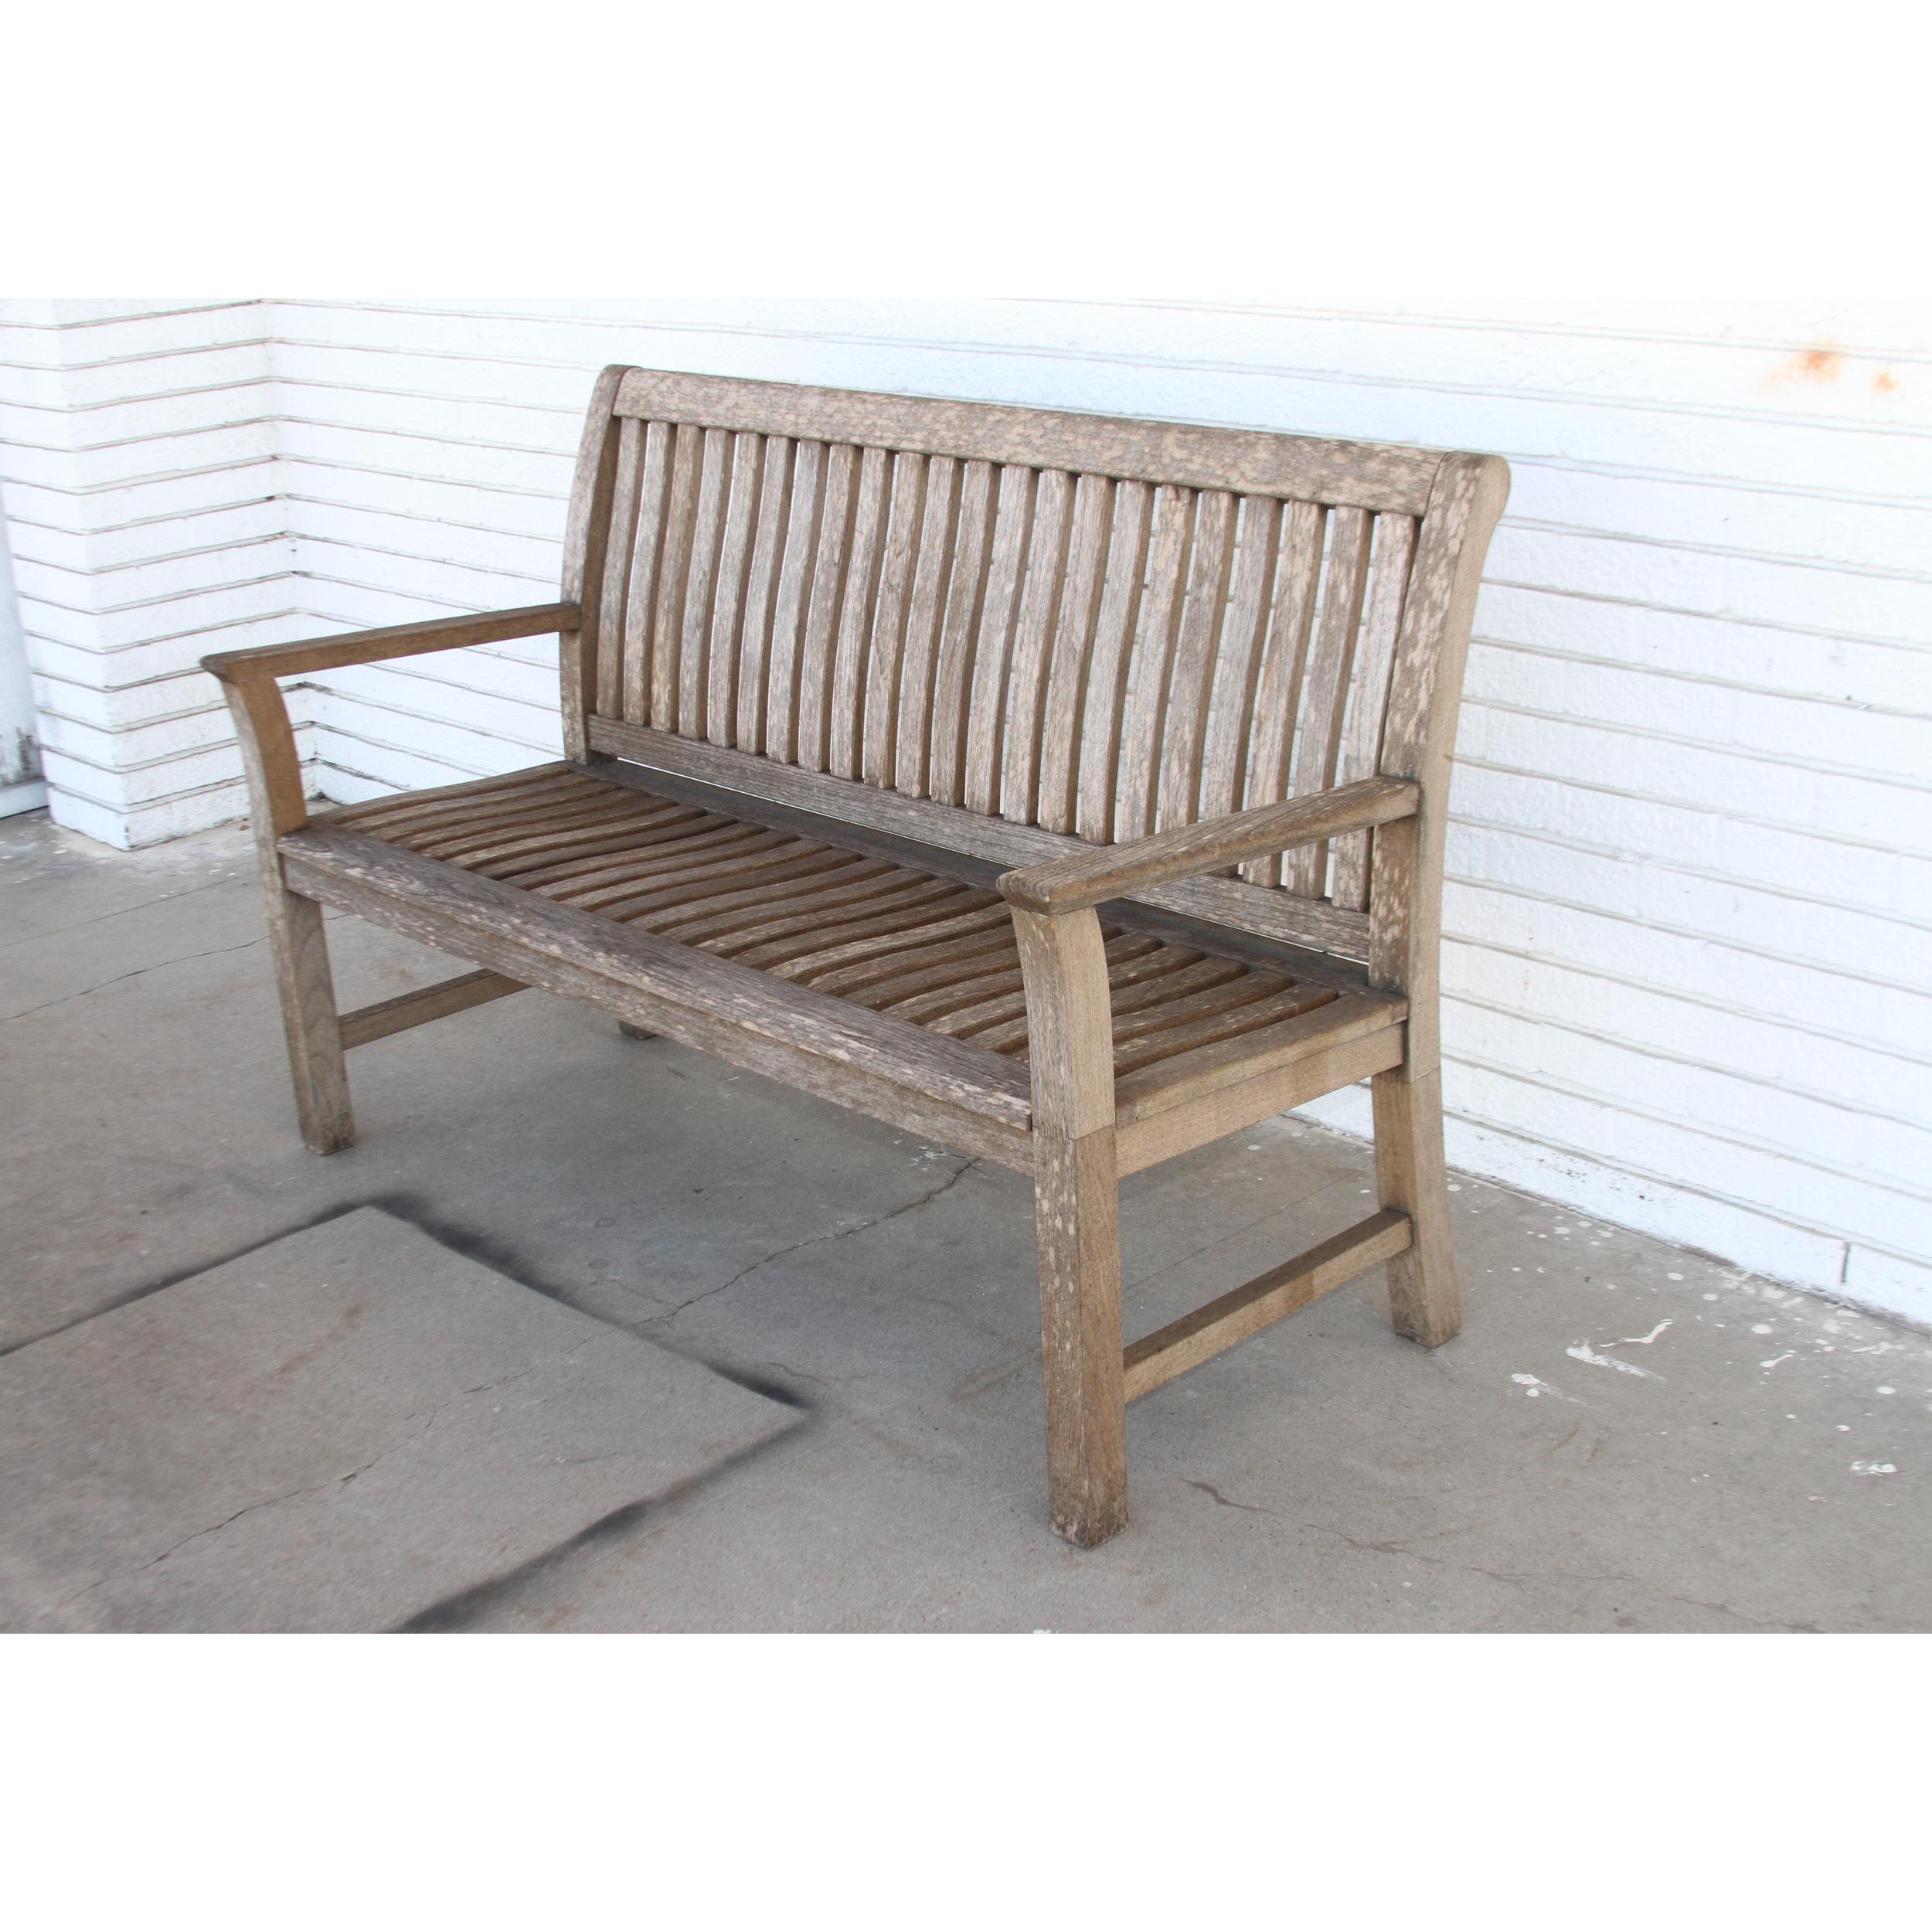 Other Kingsley Bate Bench For Sale